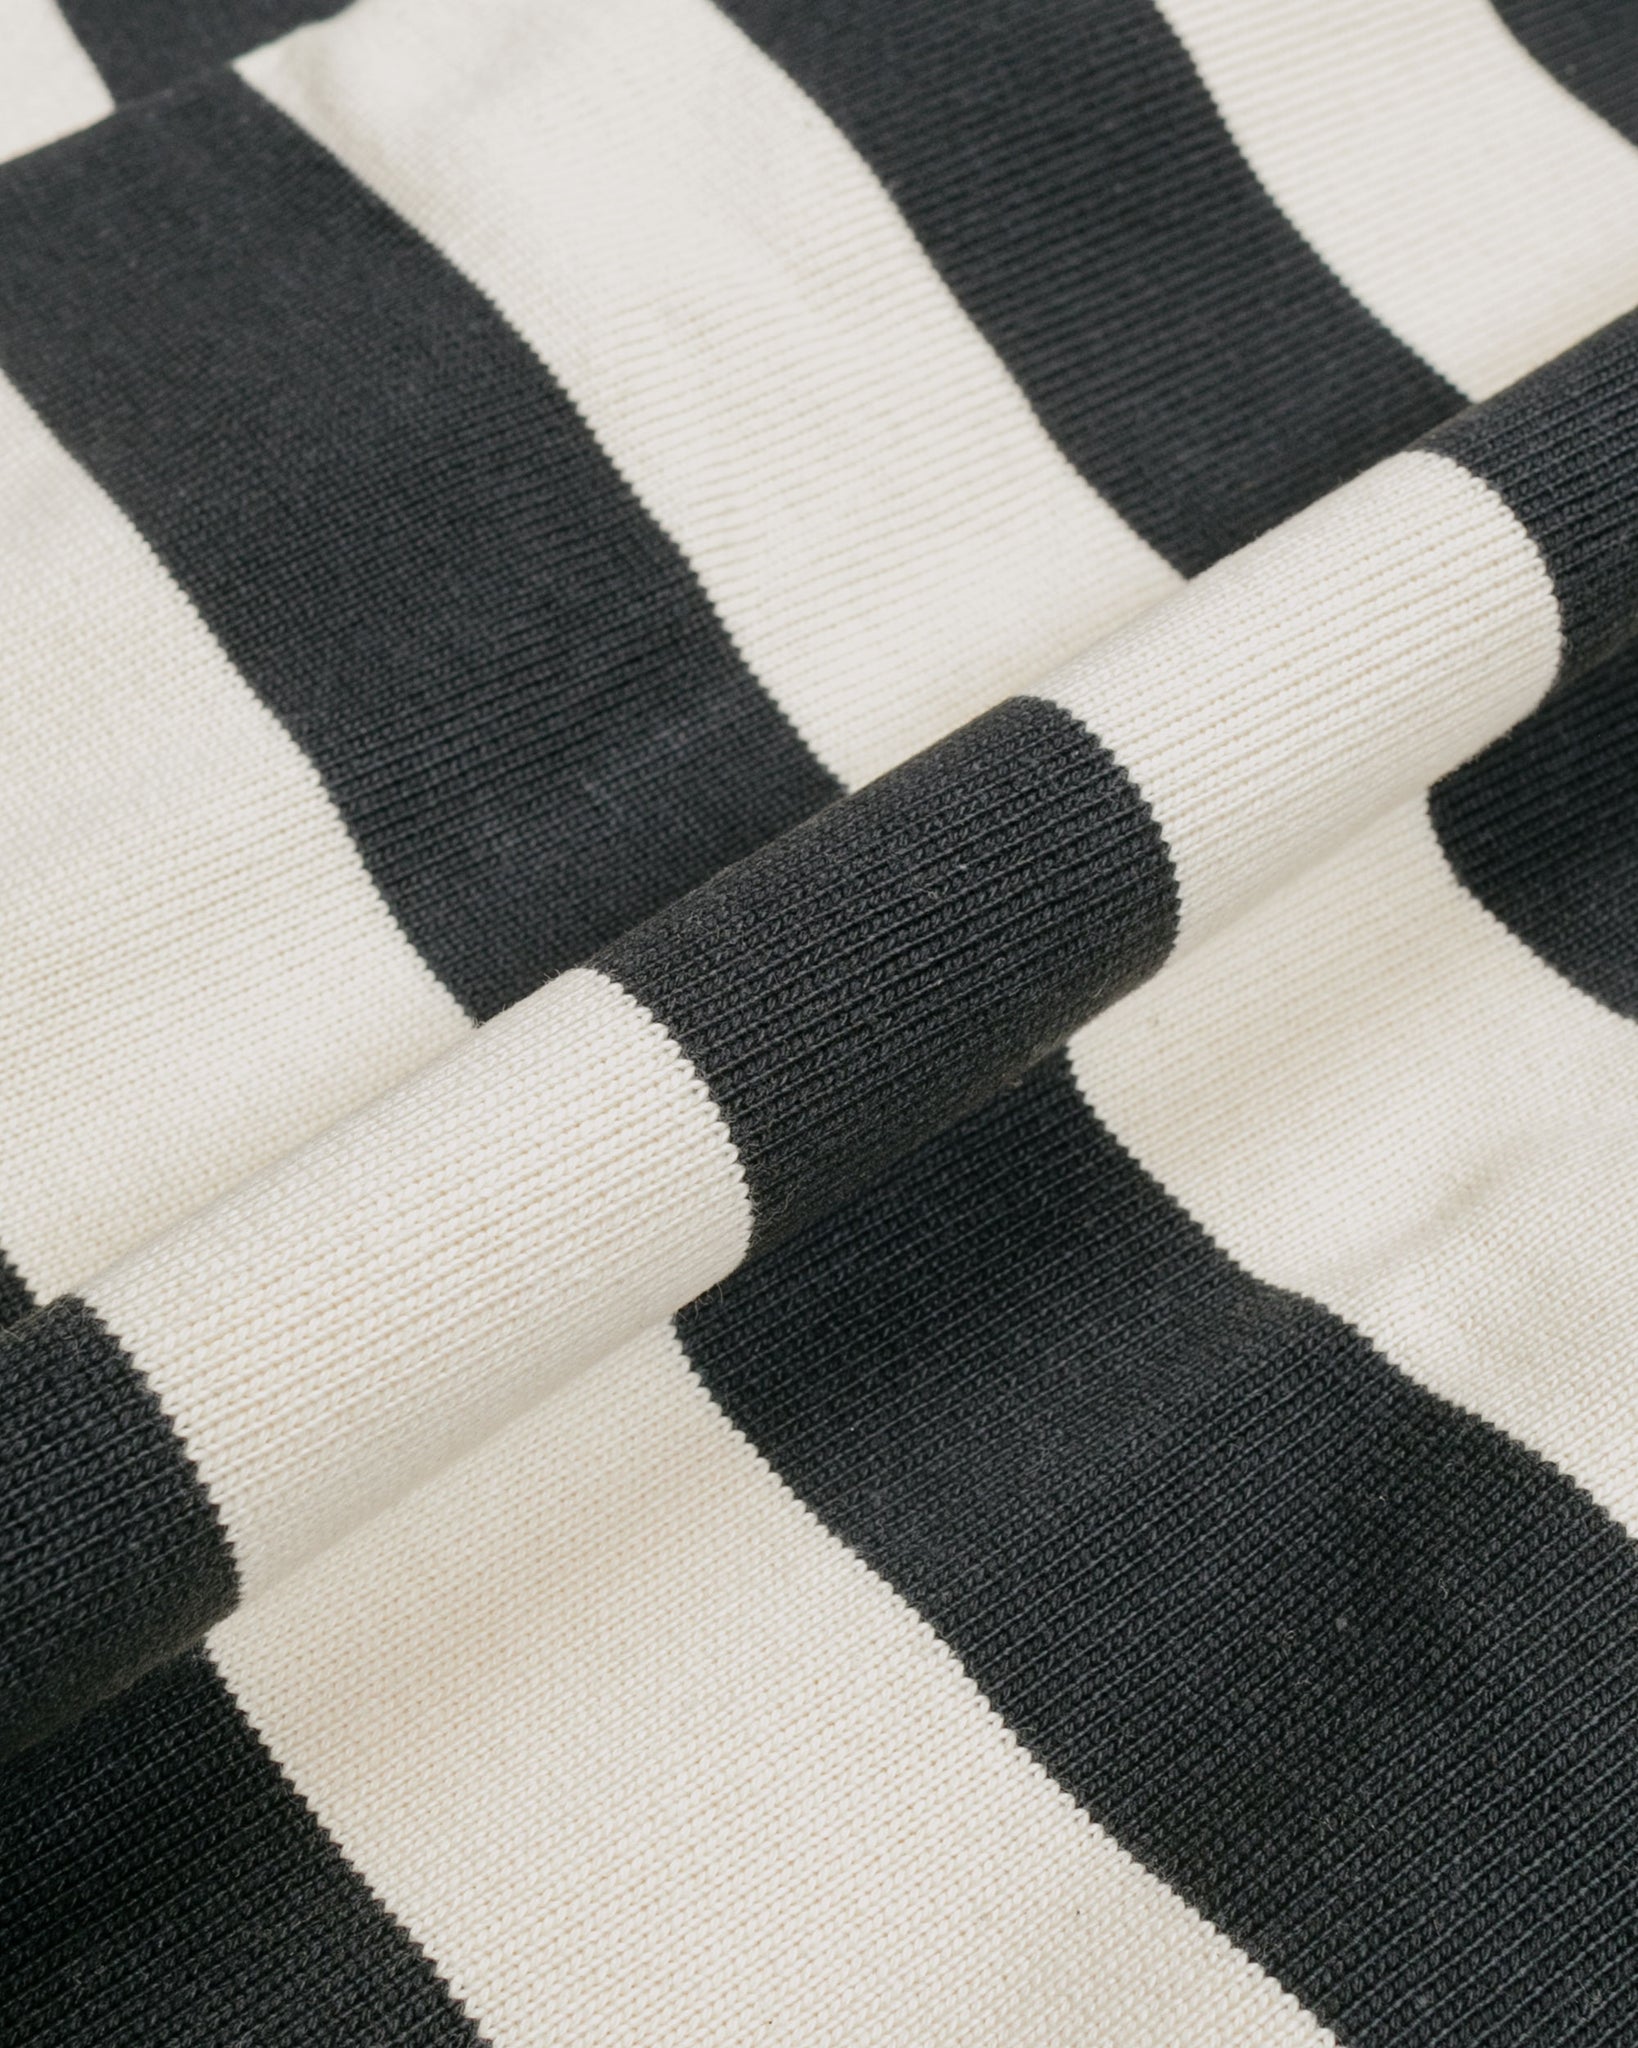 The Real McCoy's BC18104 Buco Stripe Racing Jersey White fabric